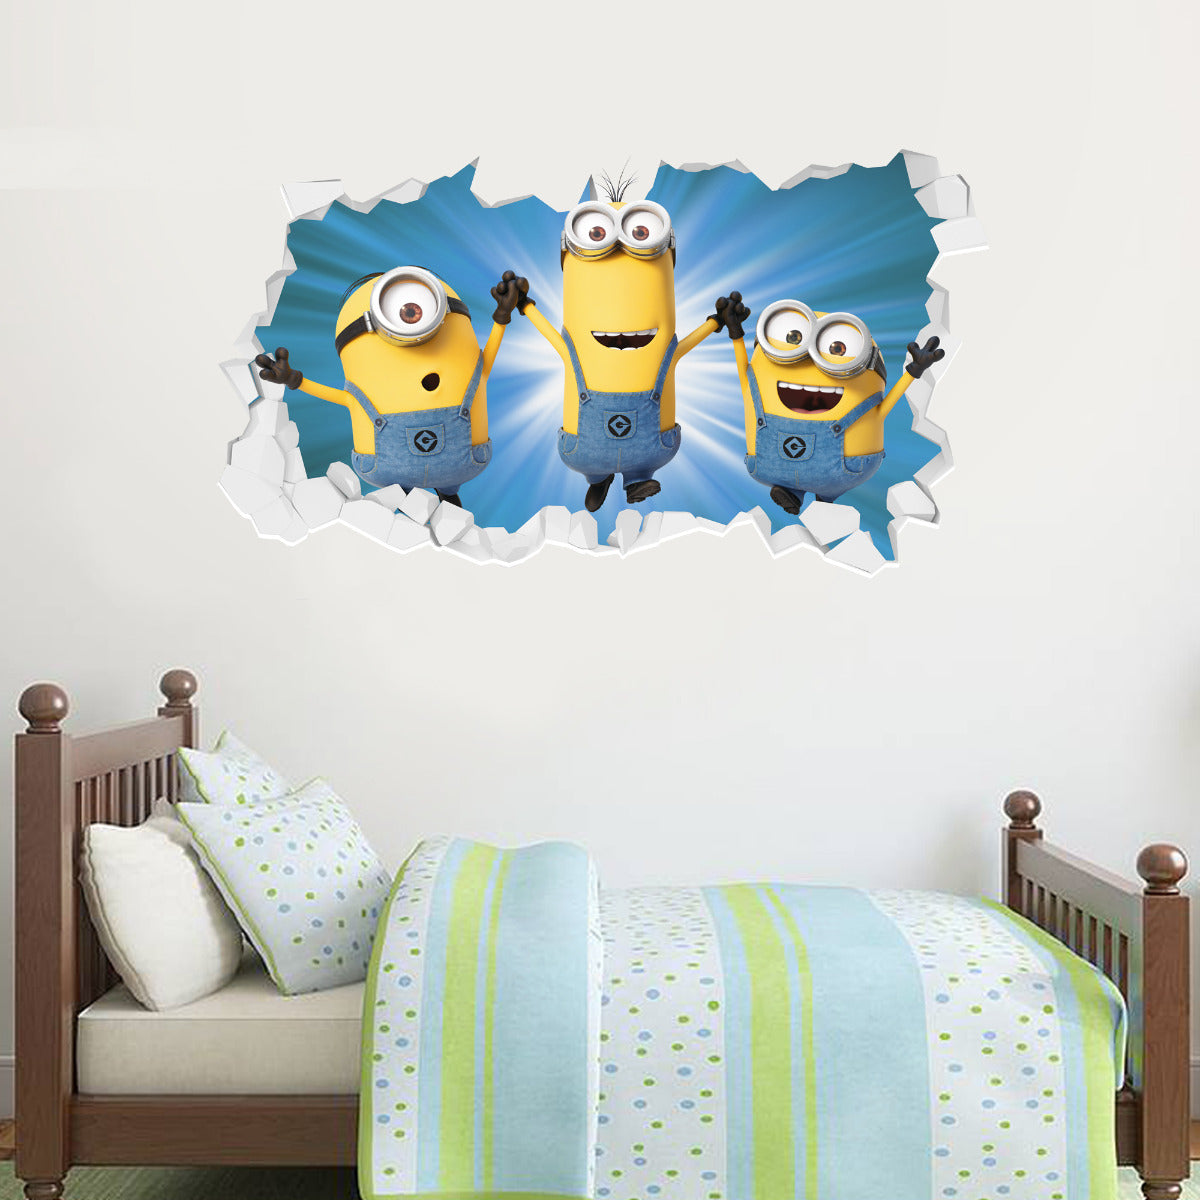 Despicable Me 3 Minions Jumping Broken Wall Sticker